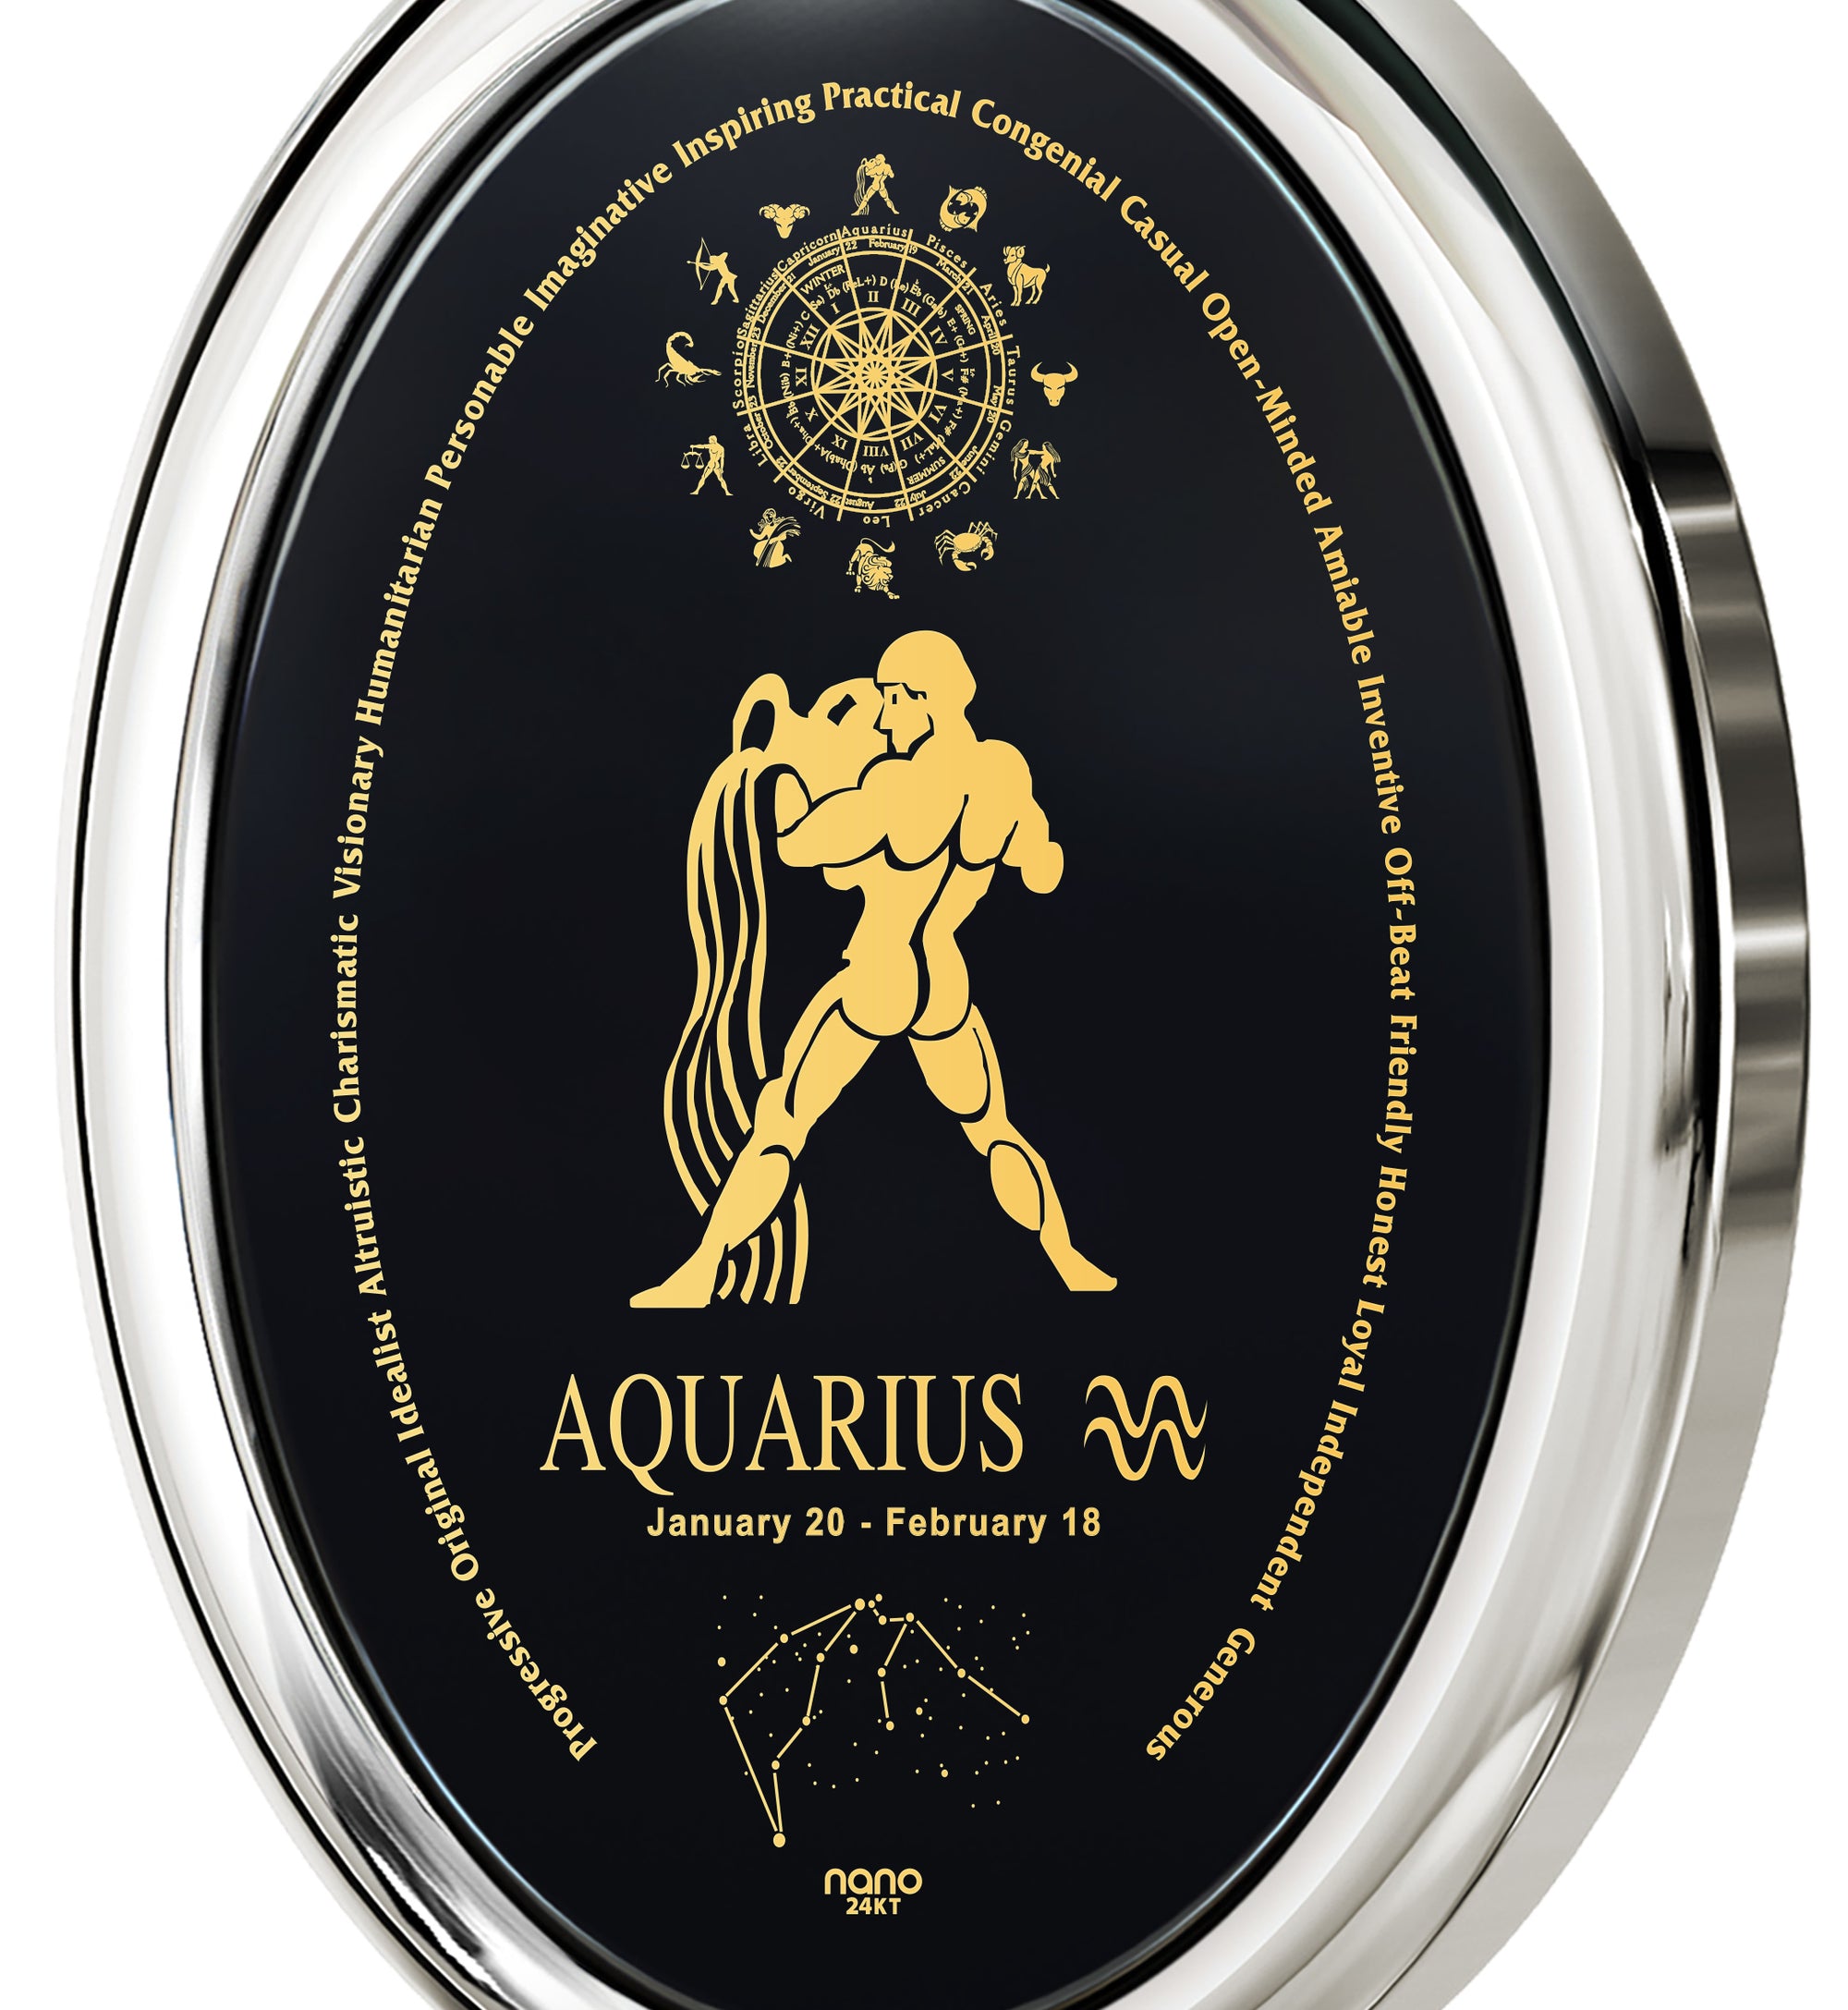 Gift | Aquarius Inscribed World\'s Only Jewelry Gold NanoStyle Necklace Unique Zodiac - 24k